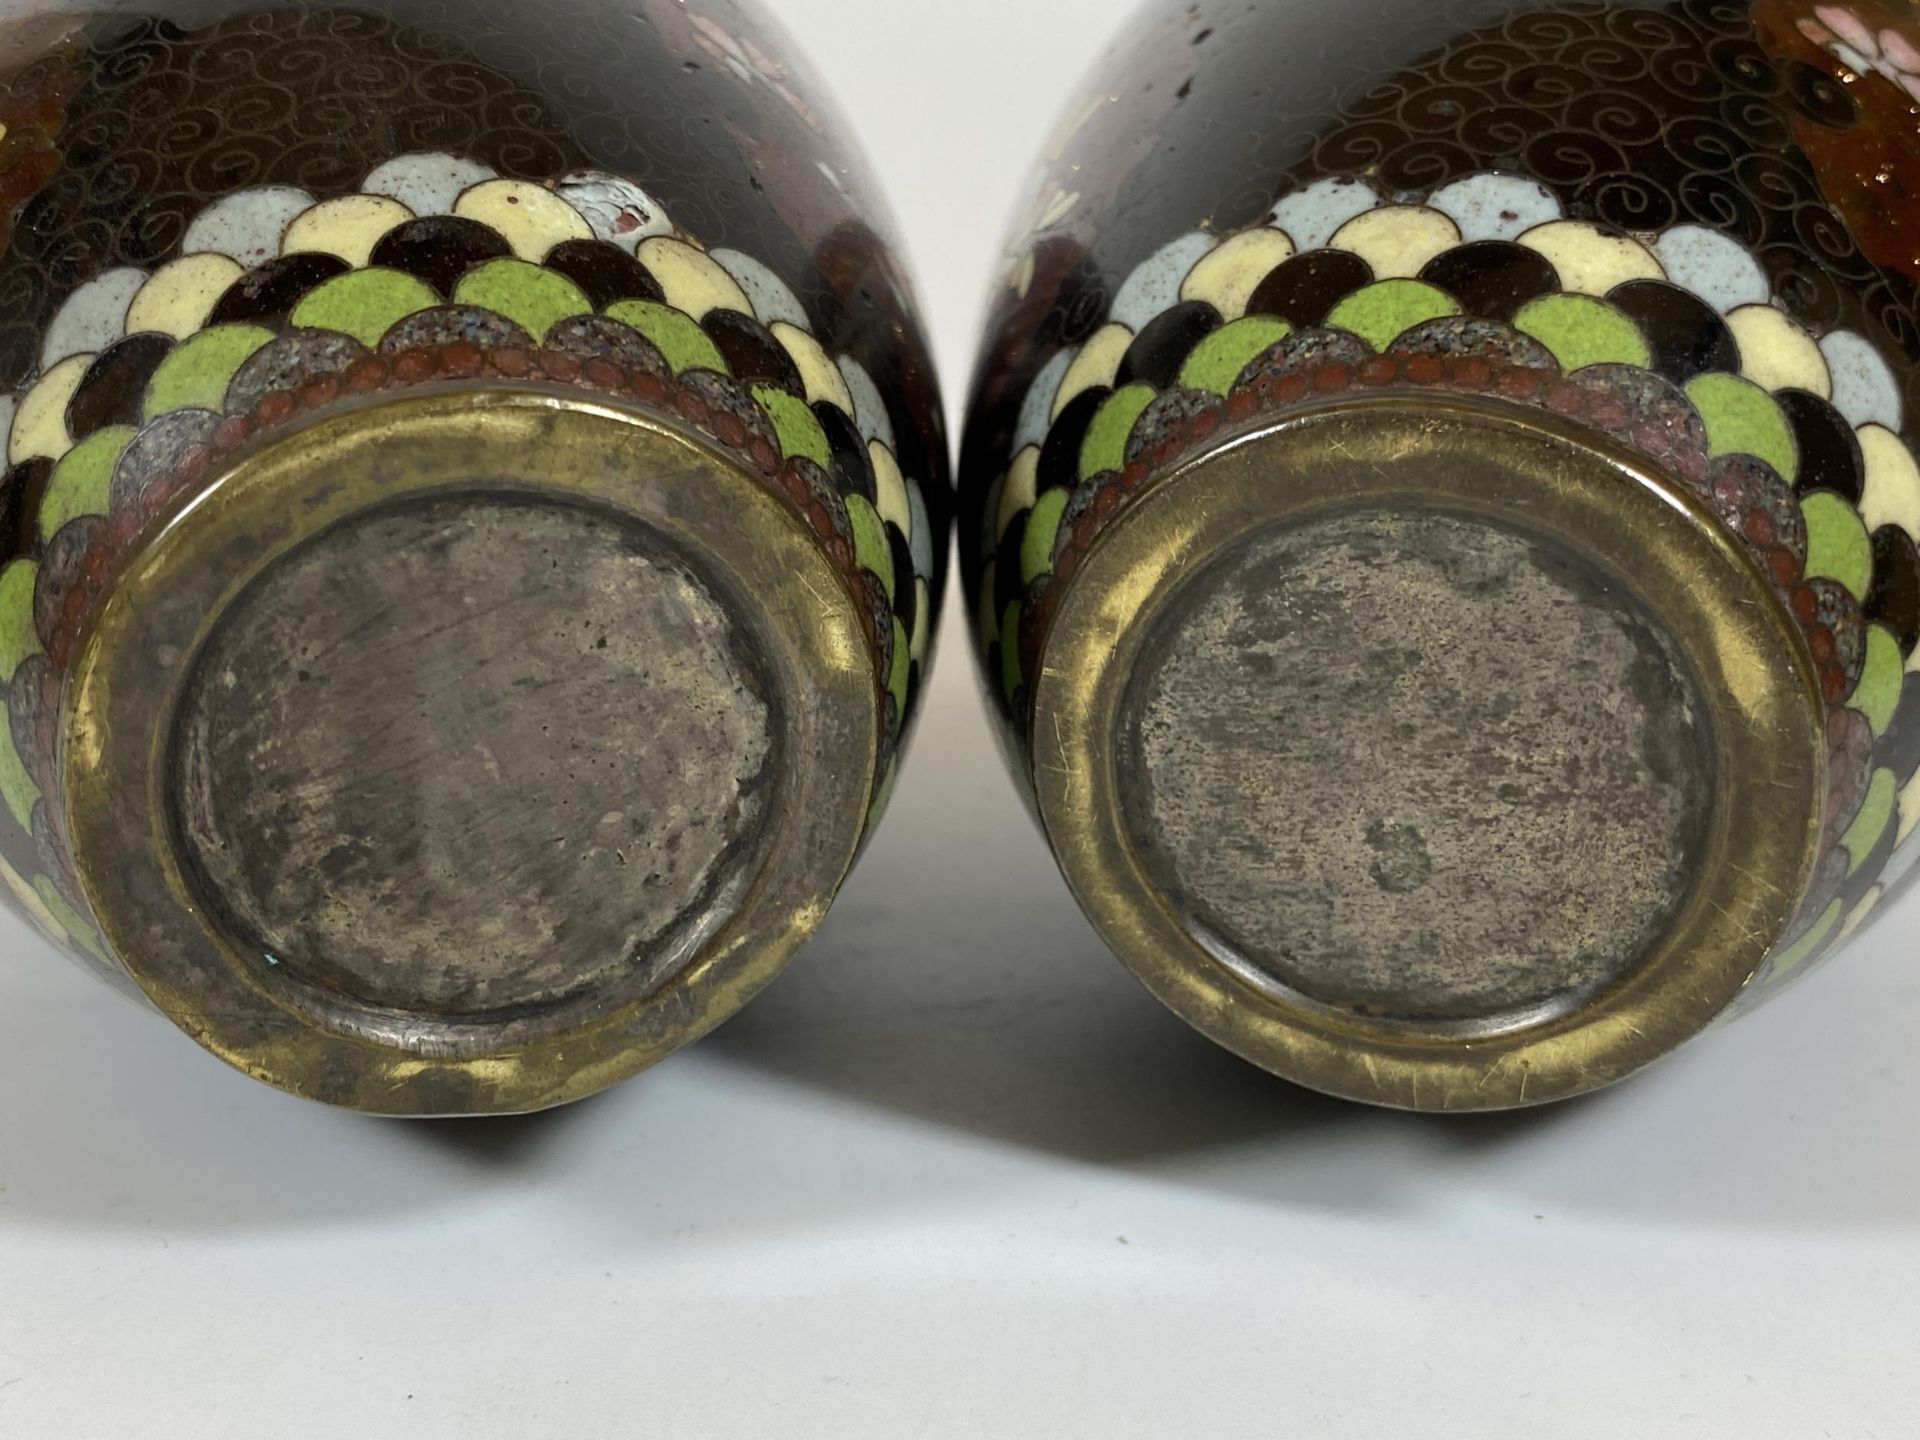 A PAIR OF JAPANESE MEIJI PERIOD (1868-1912) BIRD AND FLORAL DESIGN CLOISONNE OVOID FORM VASES, - Image 3 of 4